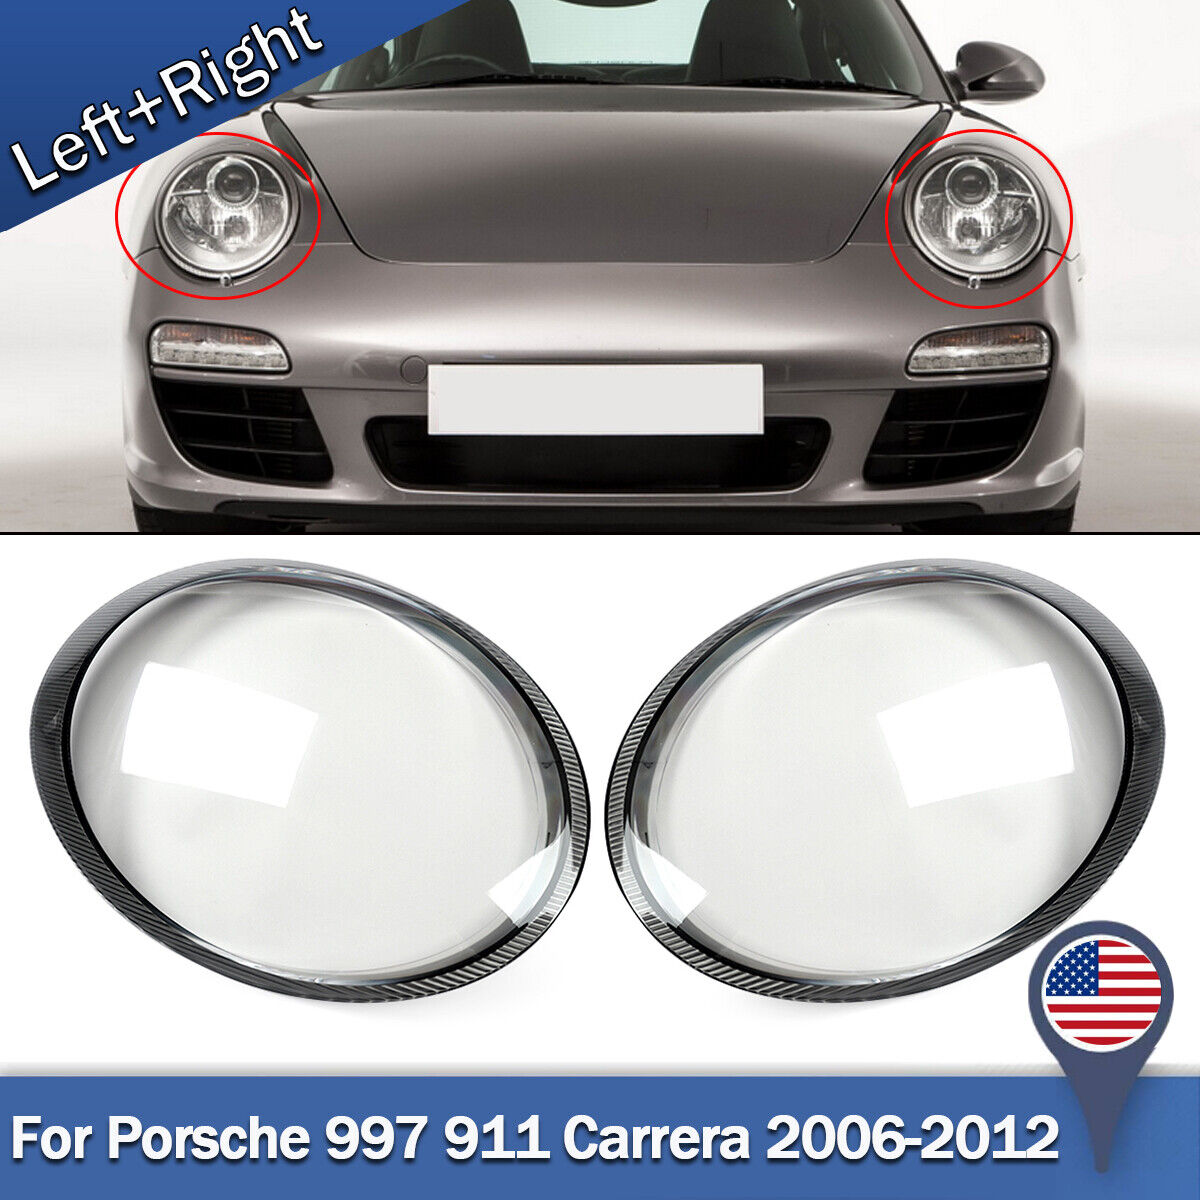 A Set Front Lampshade Headlight Lens Cover Fit for Porsche 997 911 Carrera 06-12